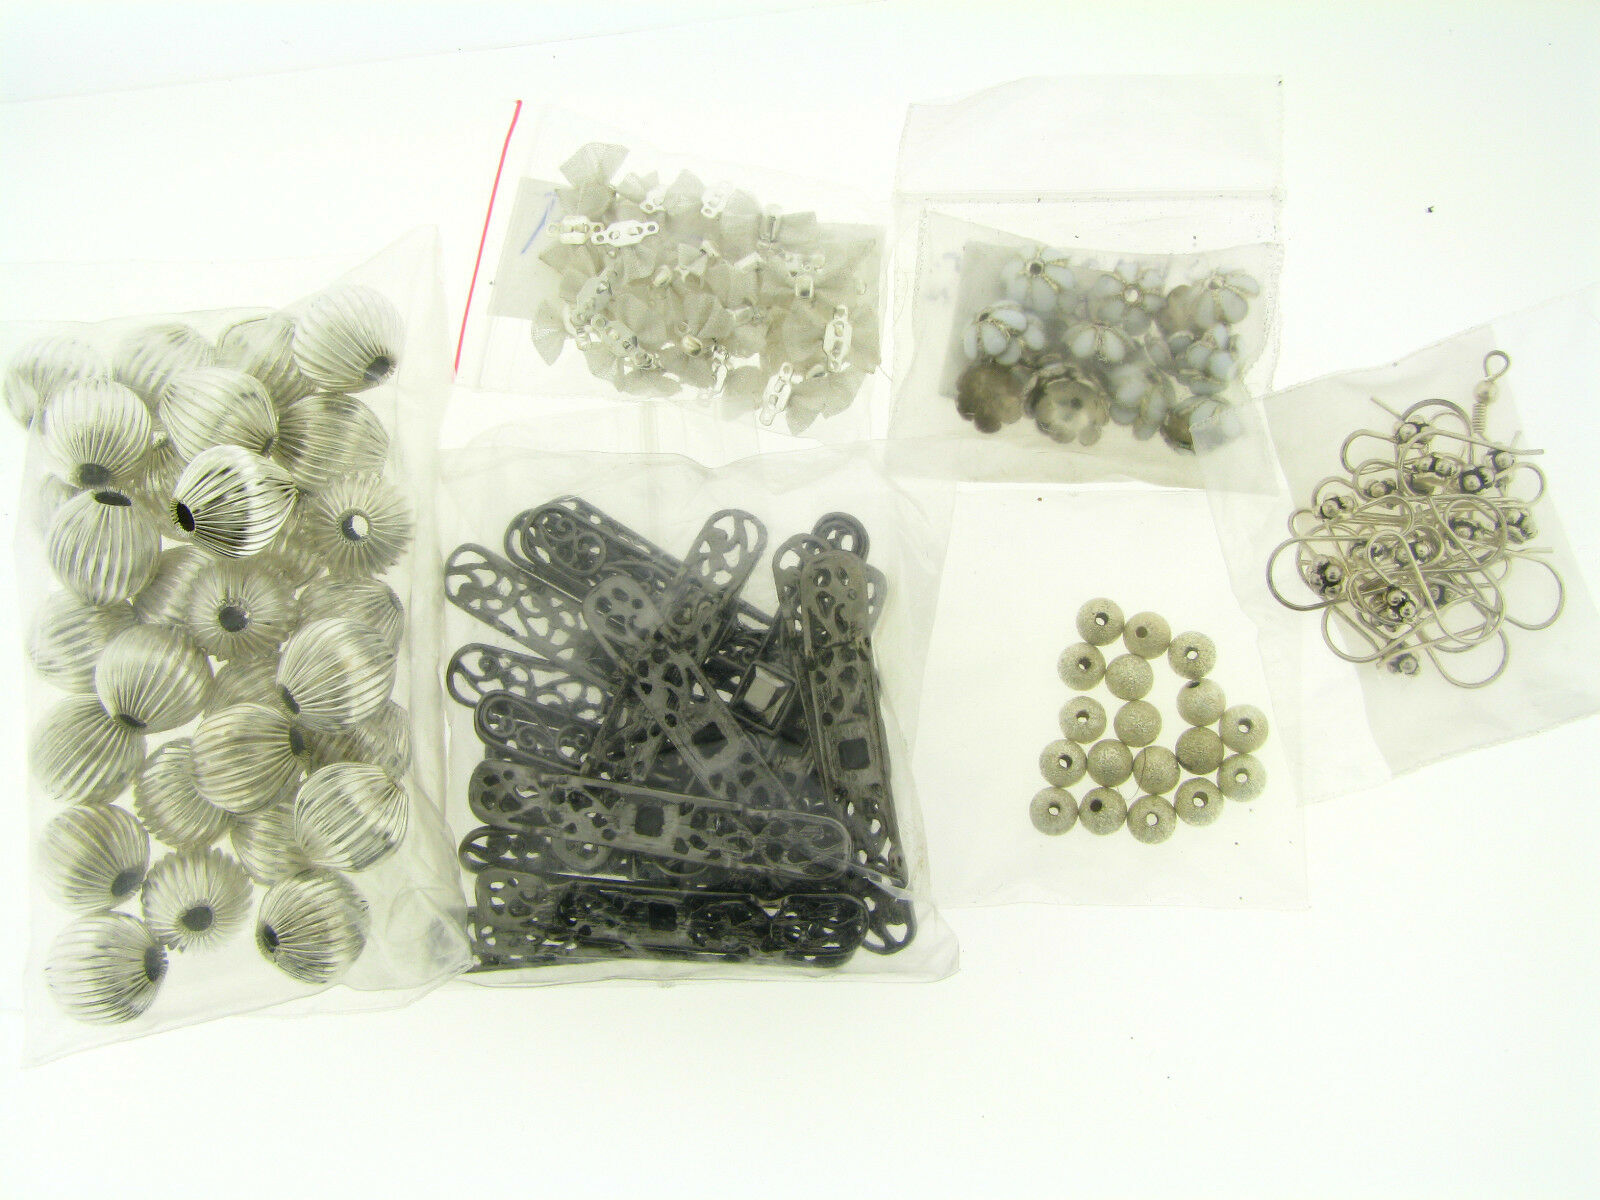 Destash Silver Plated Mixed Beads Findings Components Jewelry Reapir Making Lot